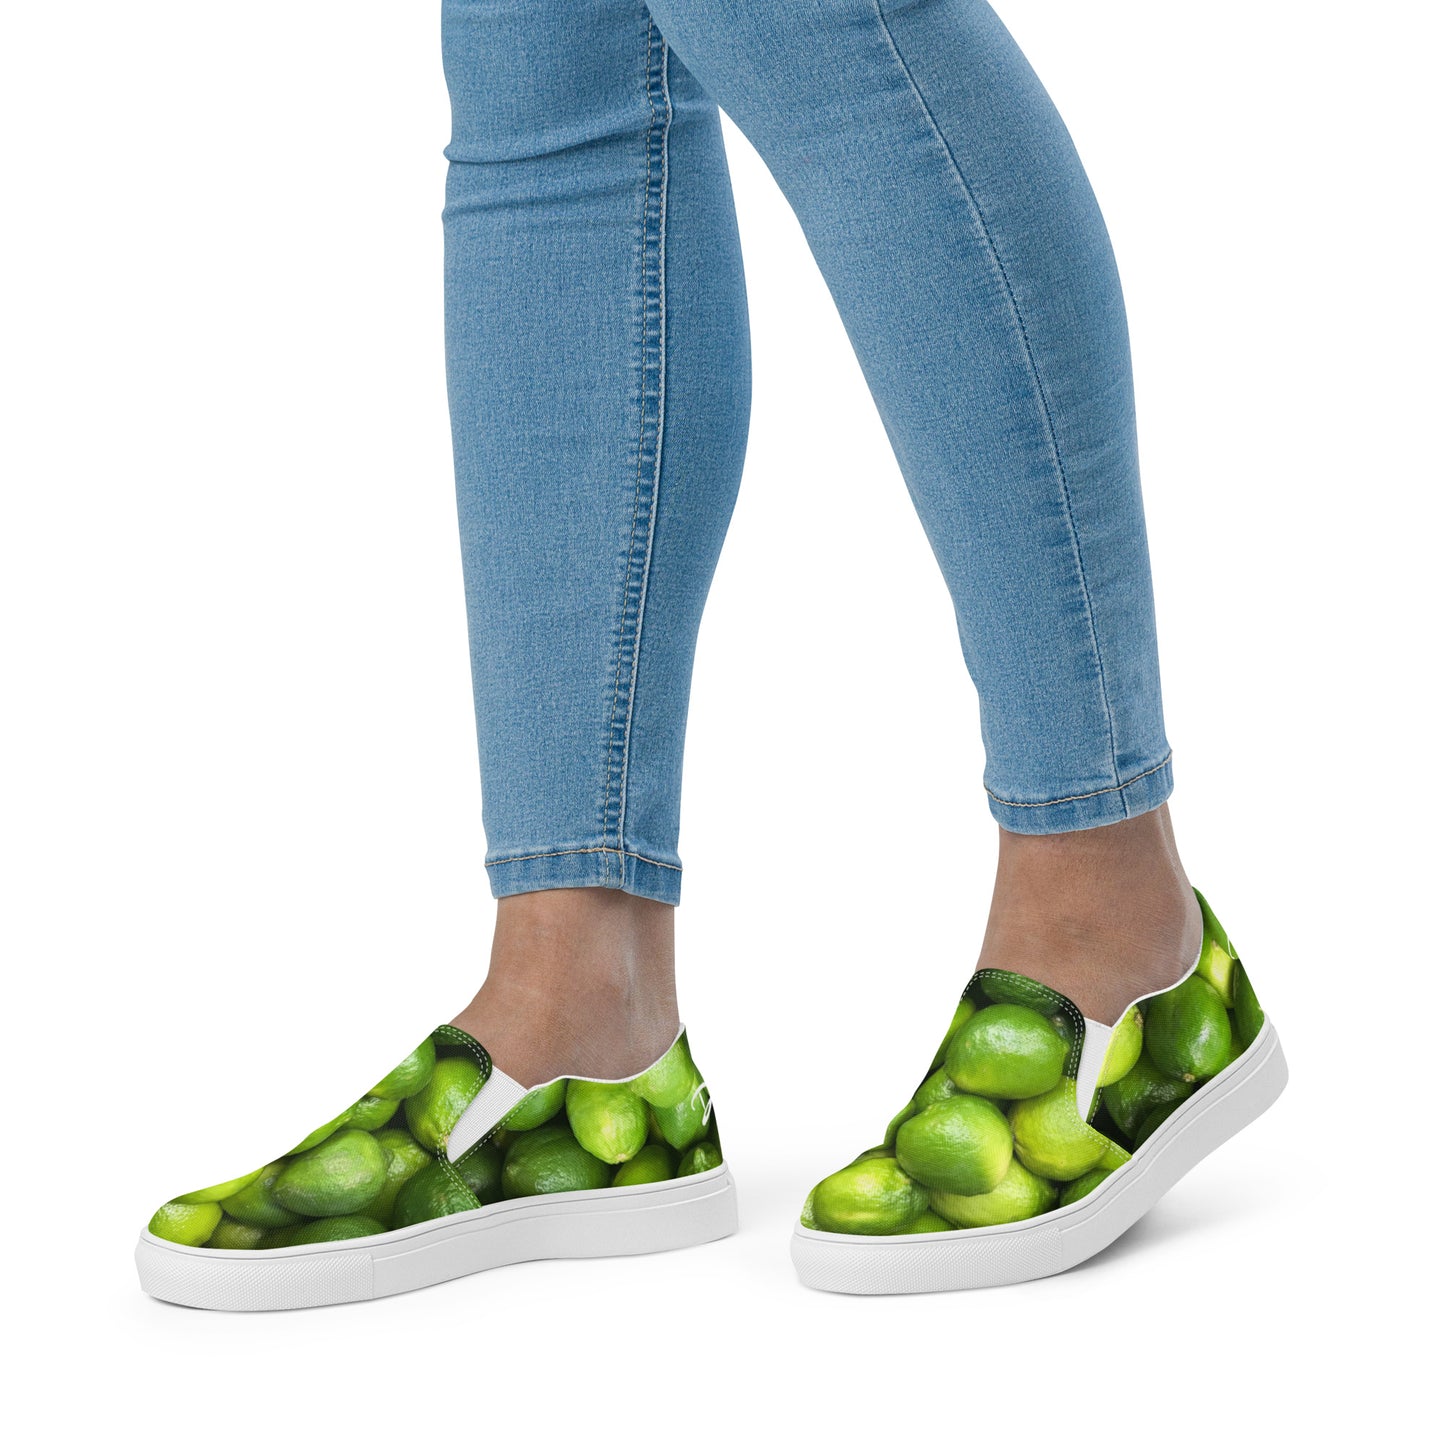 MOJITOS by DOLVING - Women’s slip-on canvas shoes